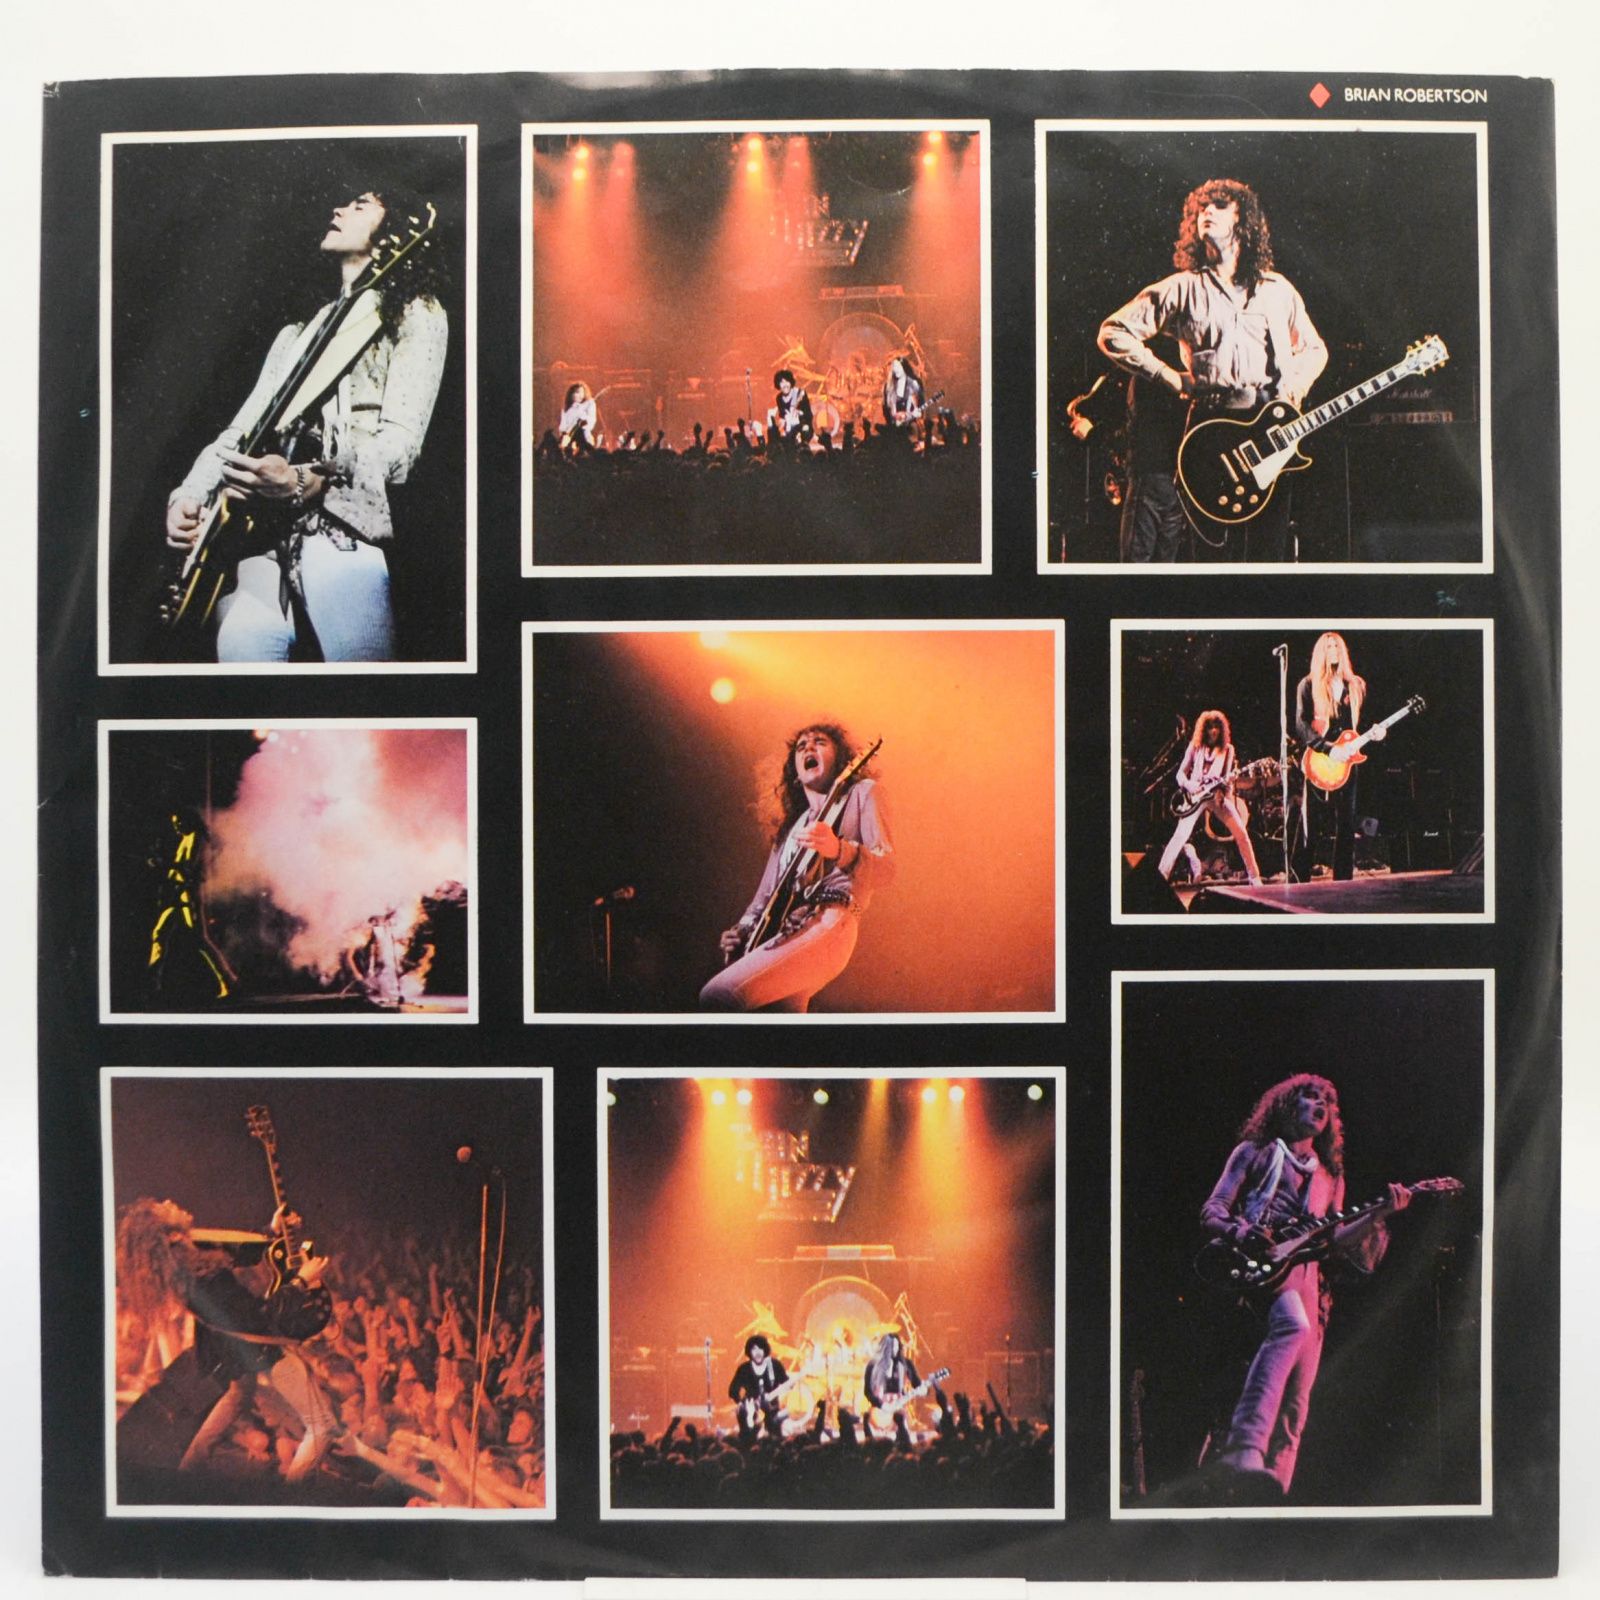 Thin Lizzy — Live And Dangerous (2LP), 1978